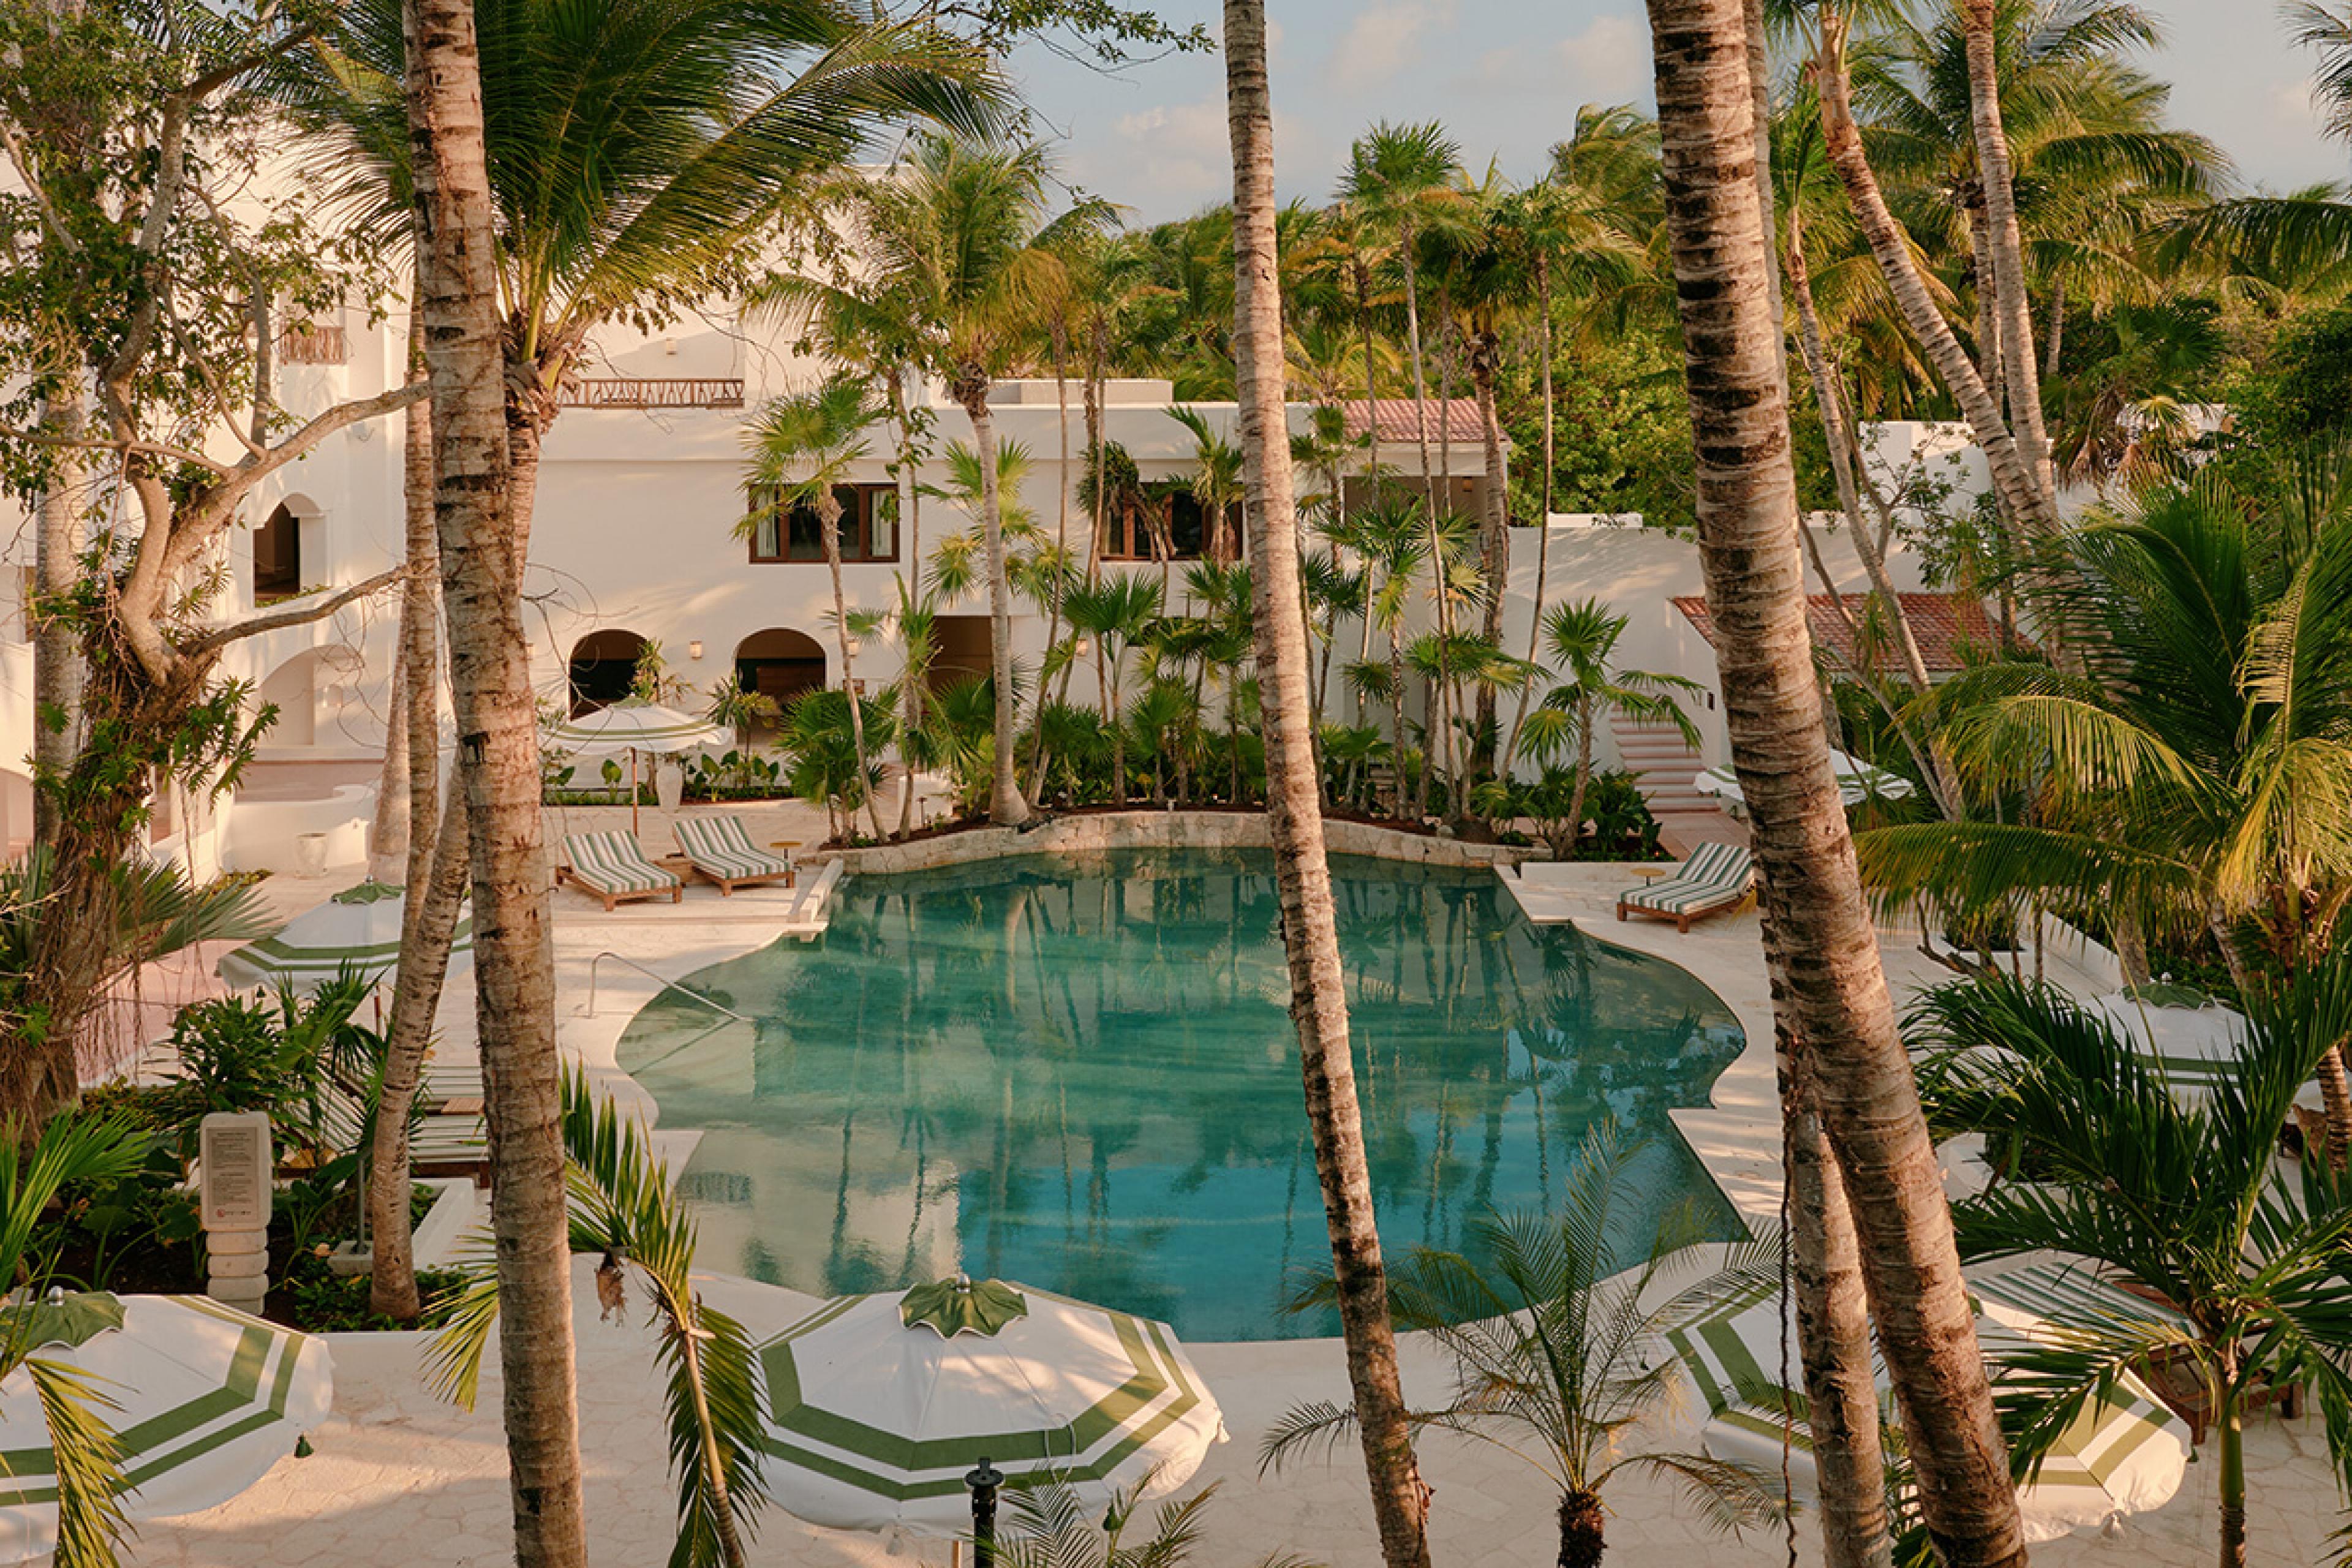 pool surrounded by palm trees and a white building backdrop